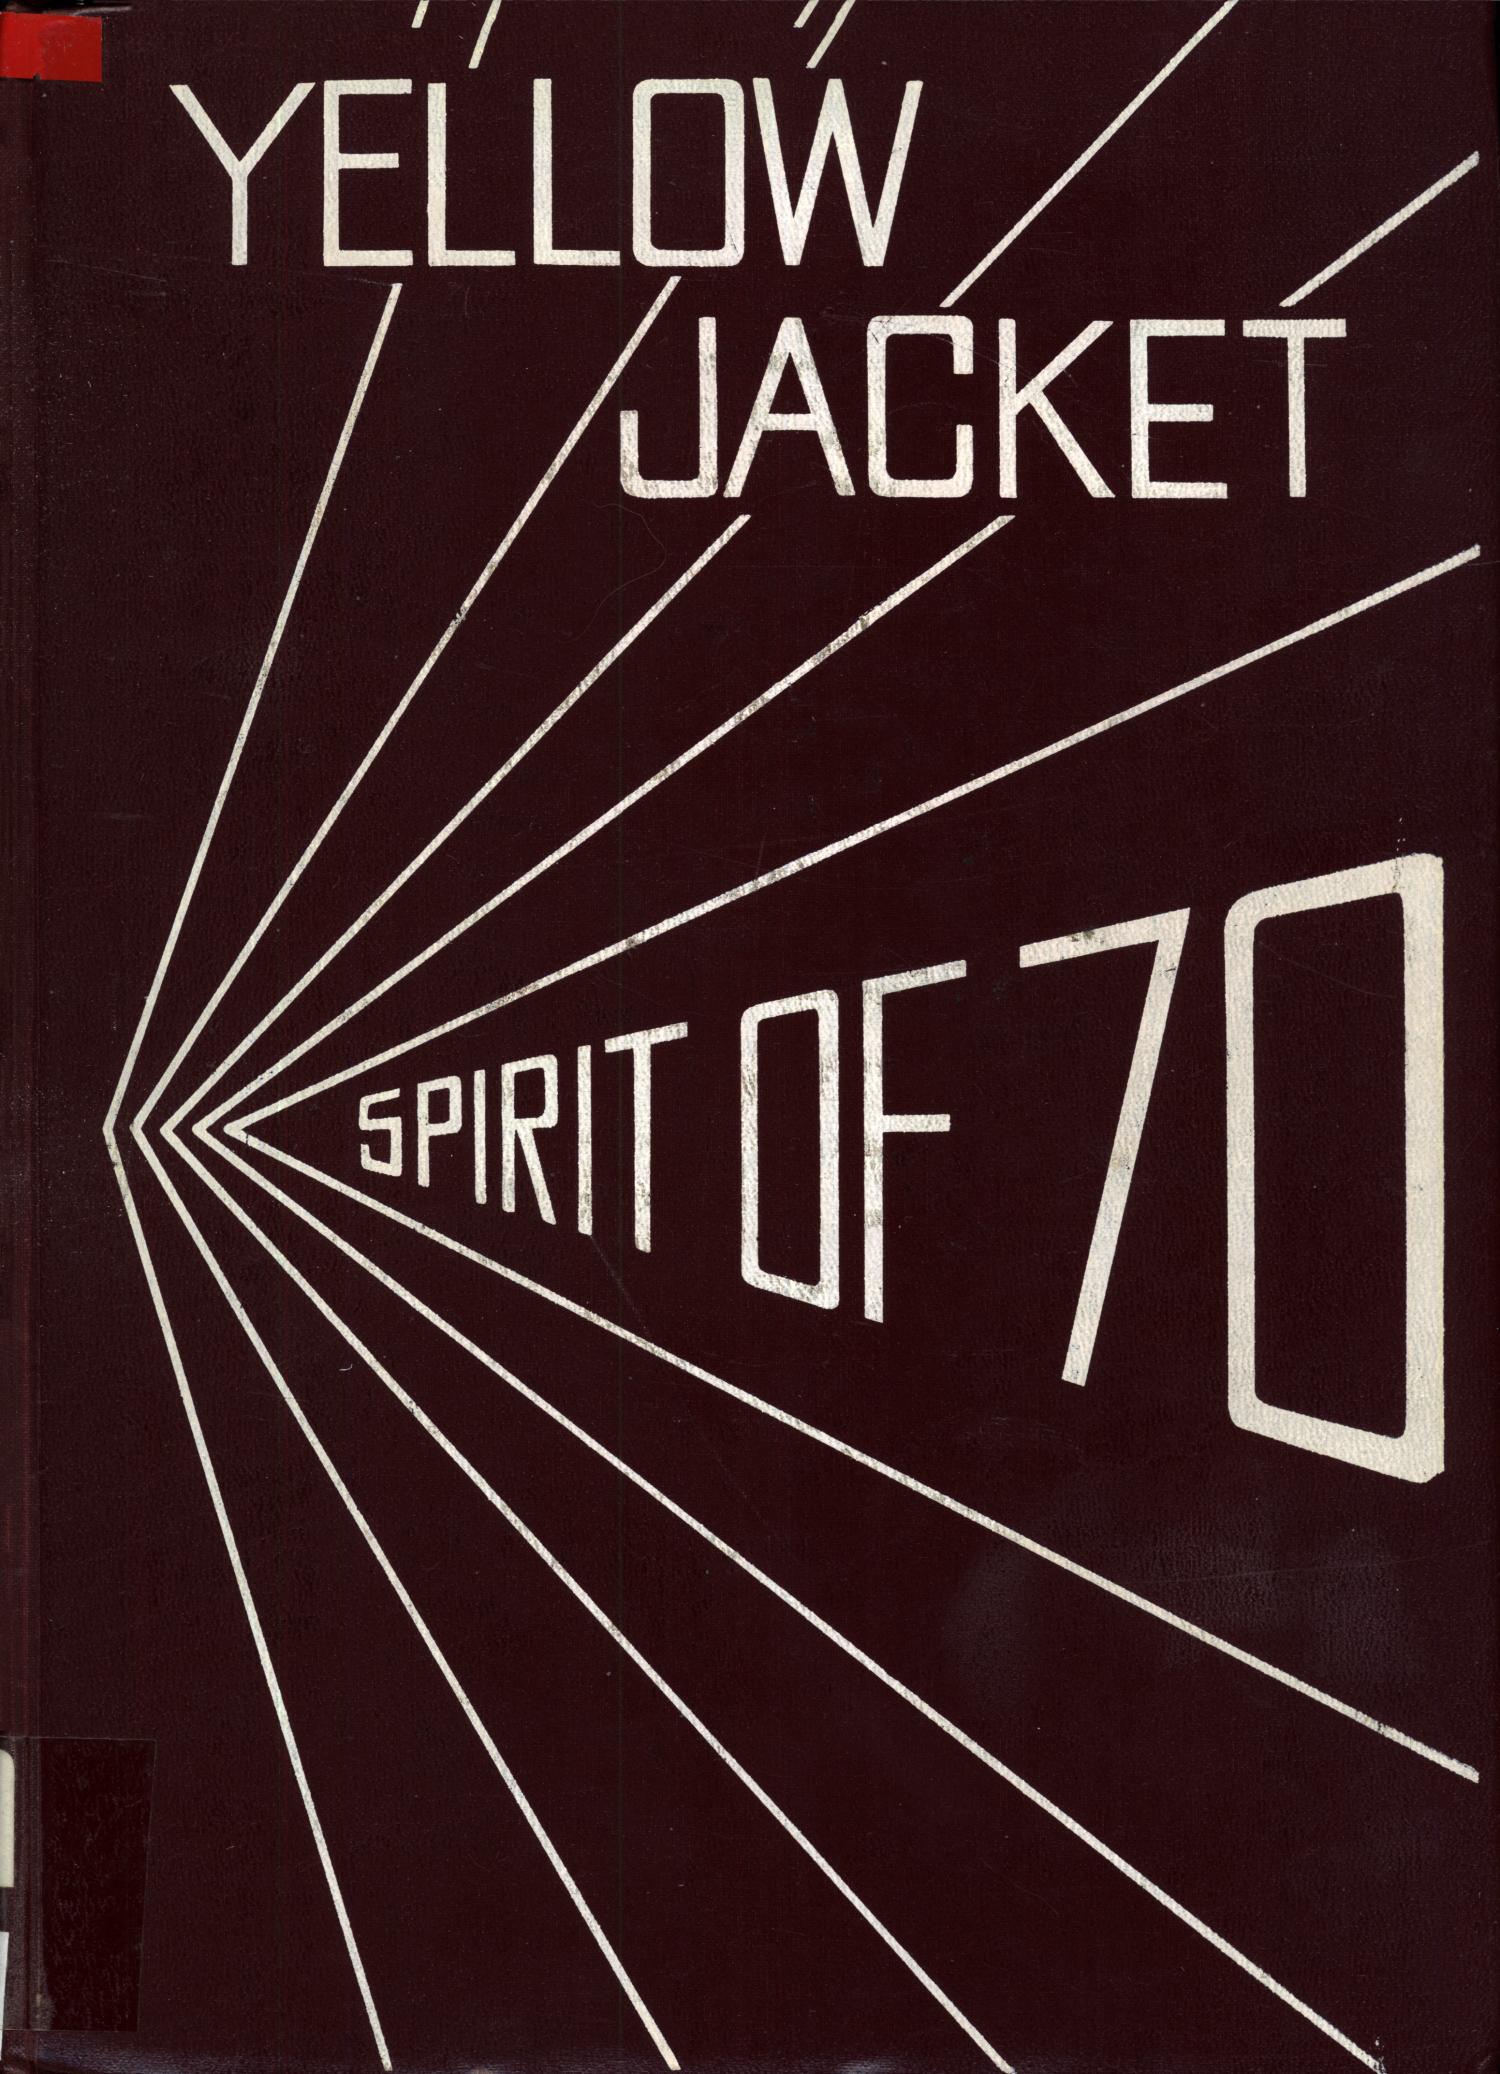 The Yellow Jacket, Yearbook of Thomas Jefferson High School, 1970
                                                
                                                    Front Cover
                                                